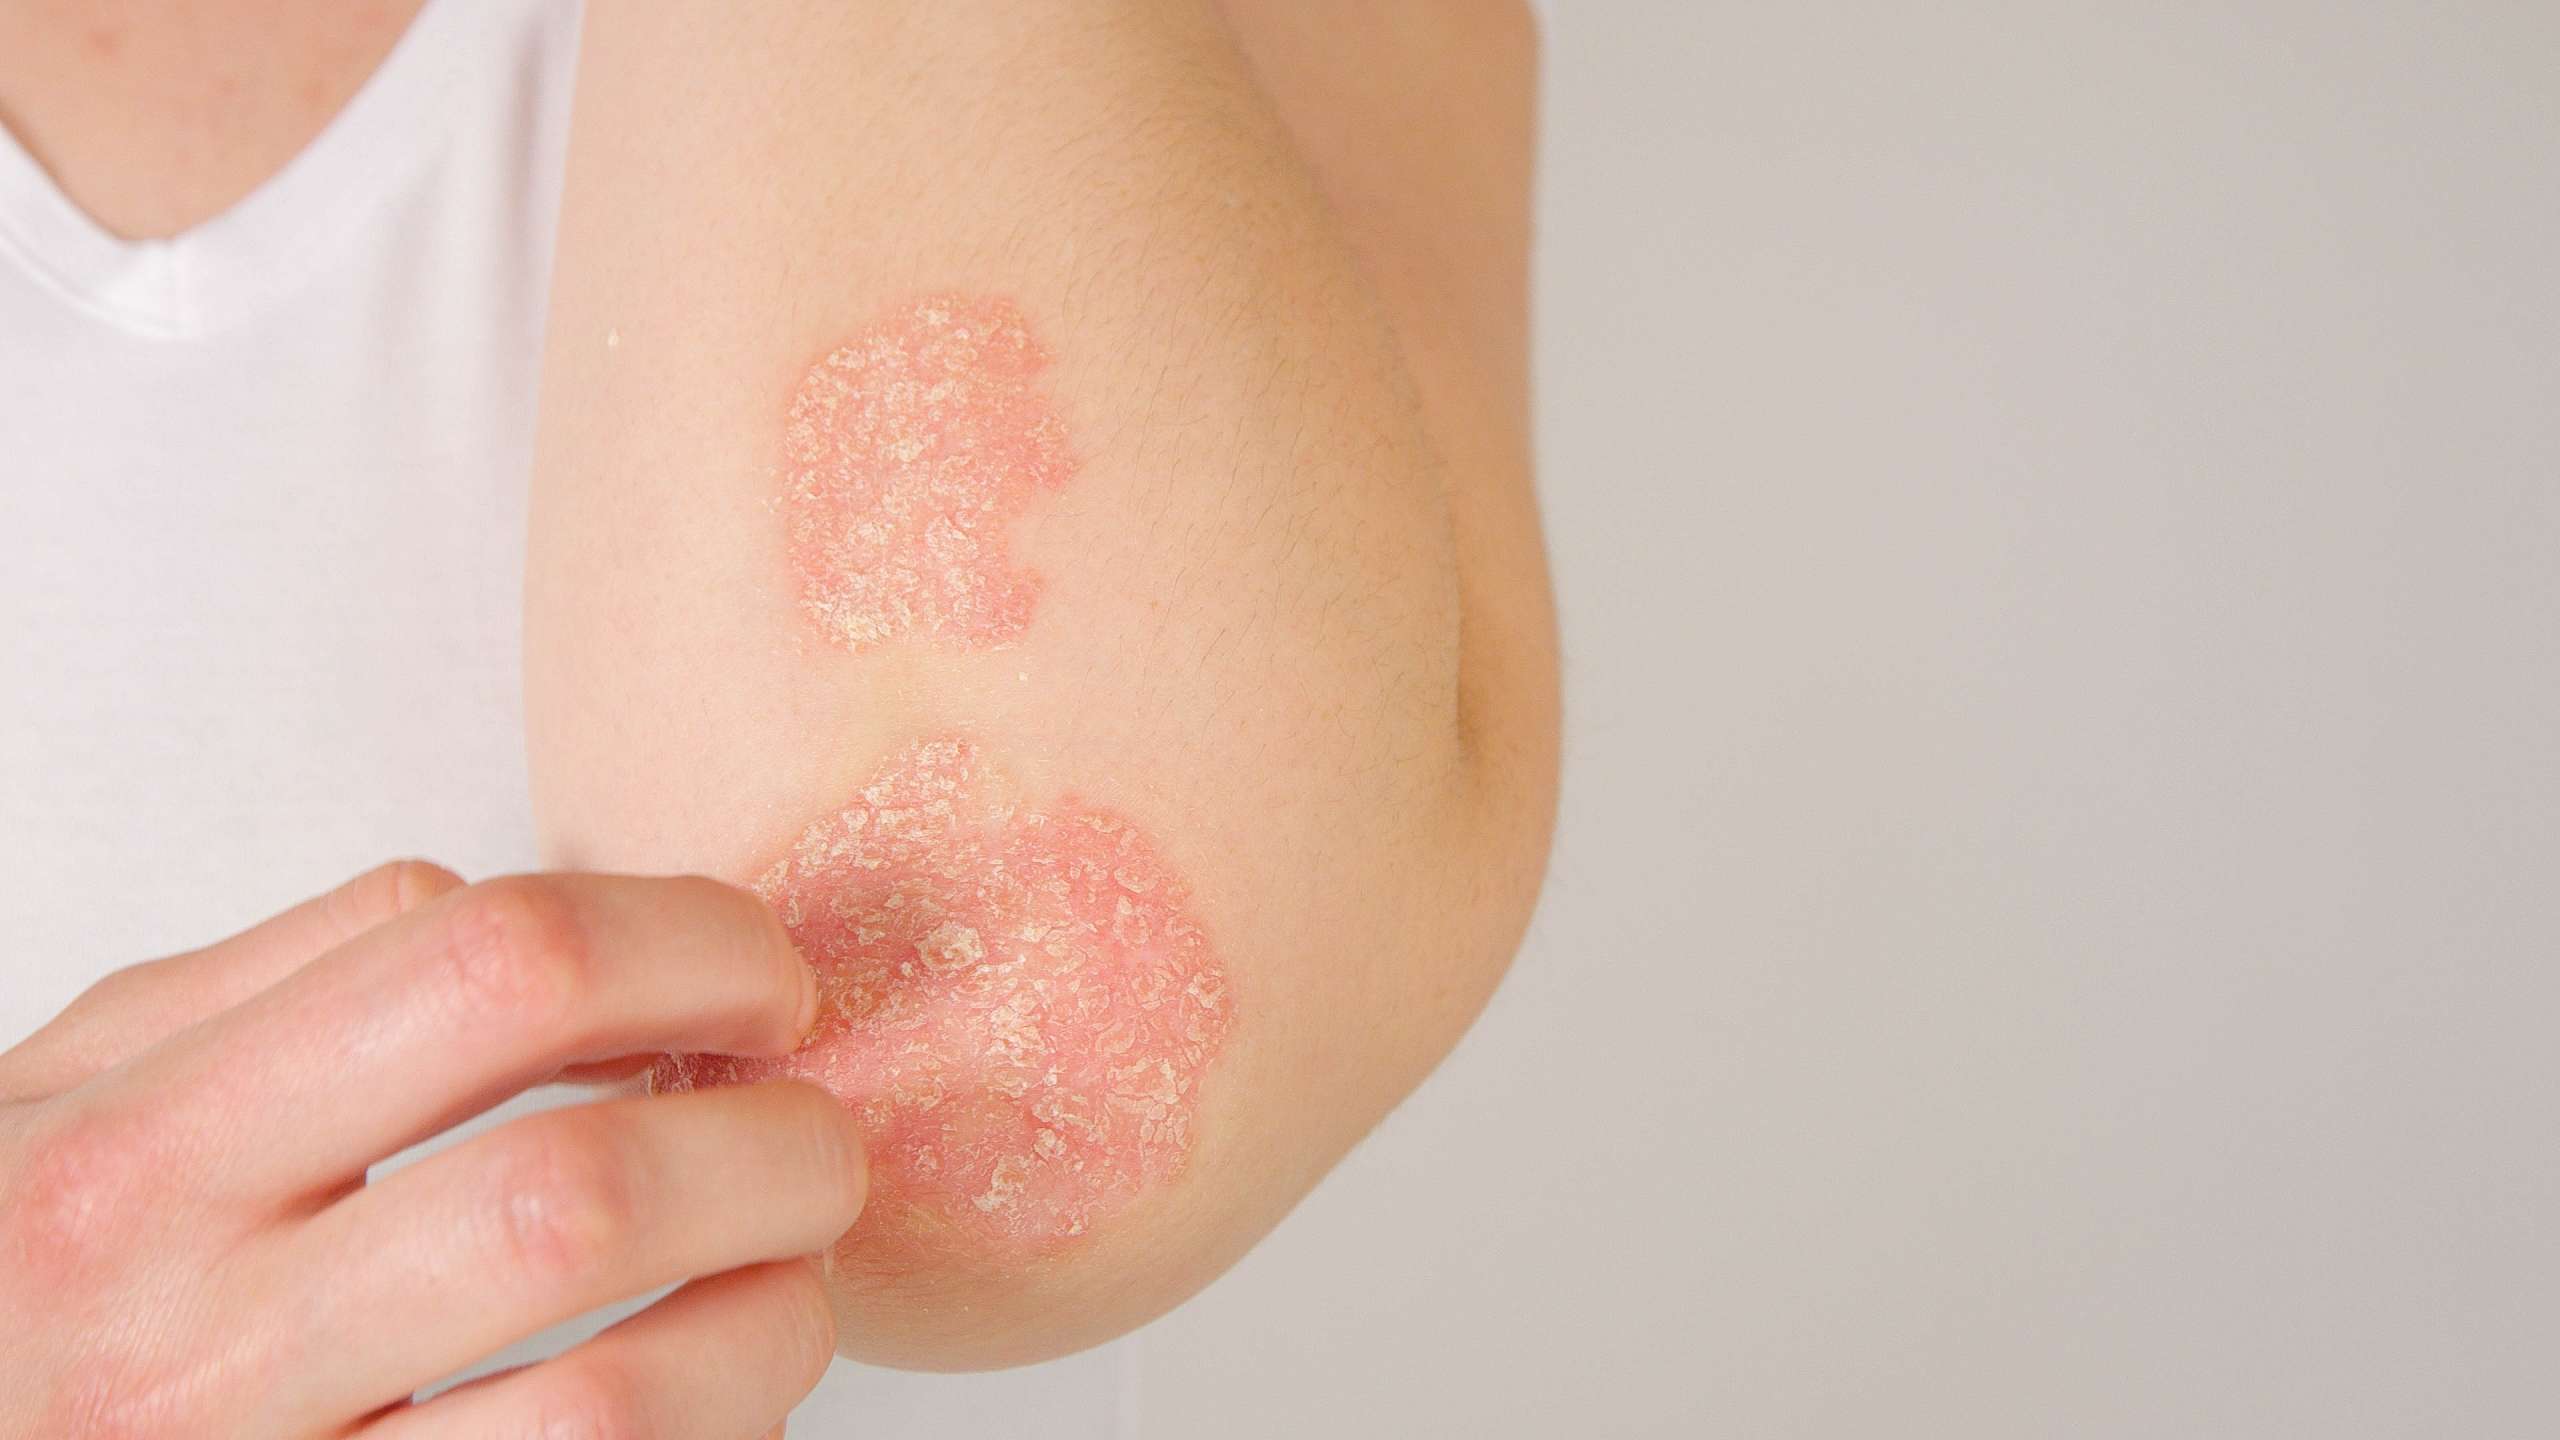 female patient suffering from psoriasis skin disease